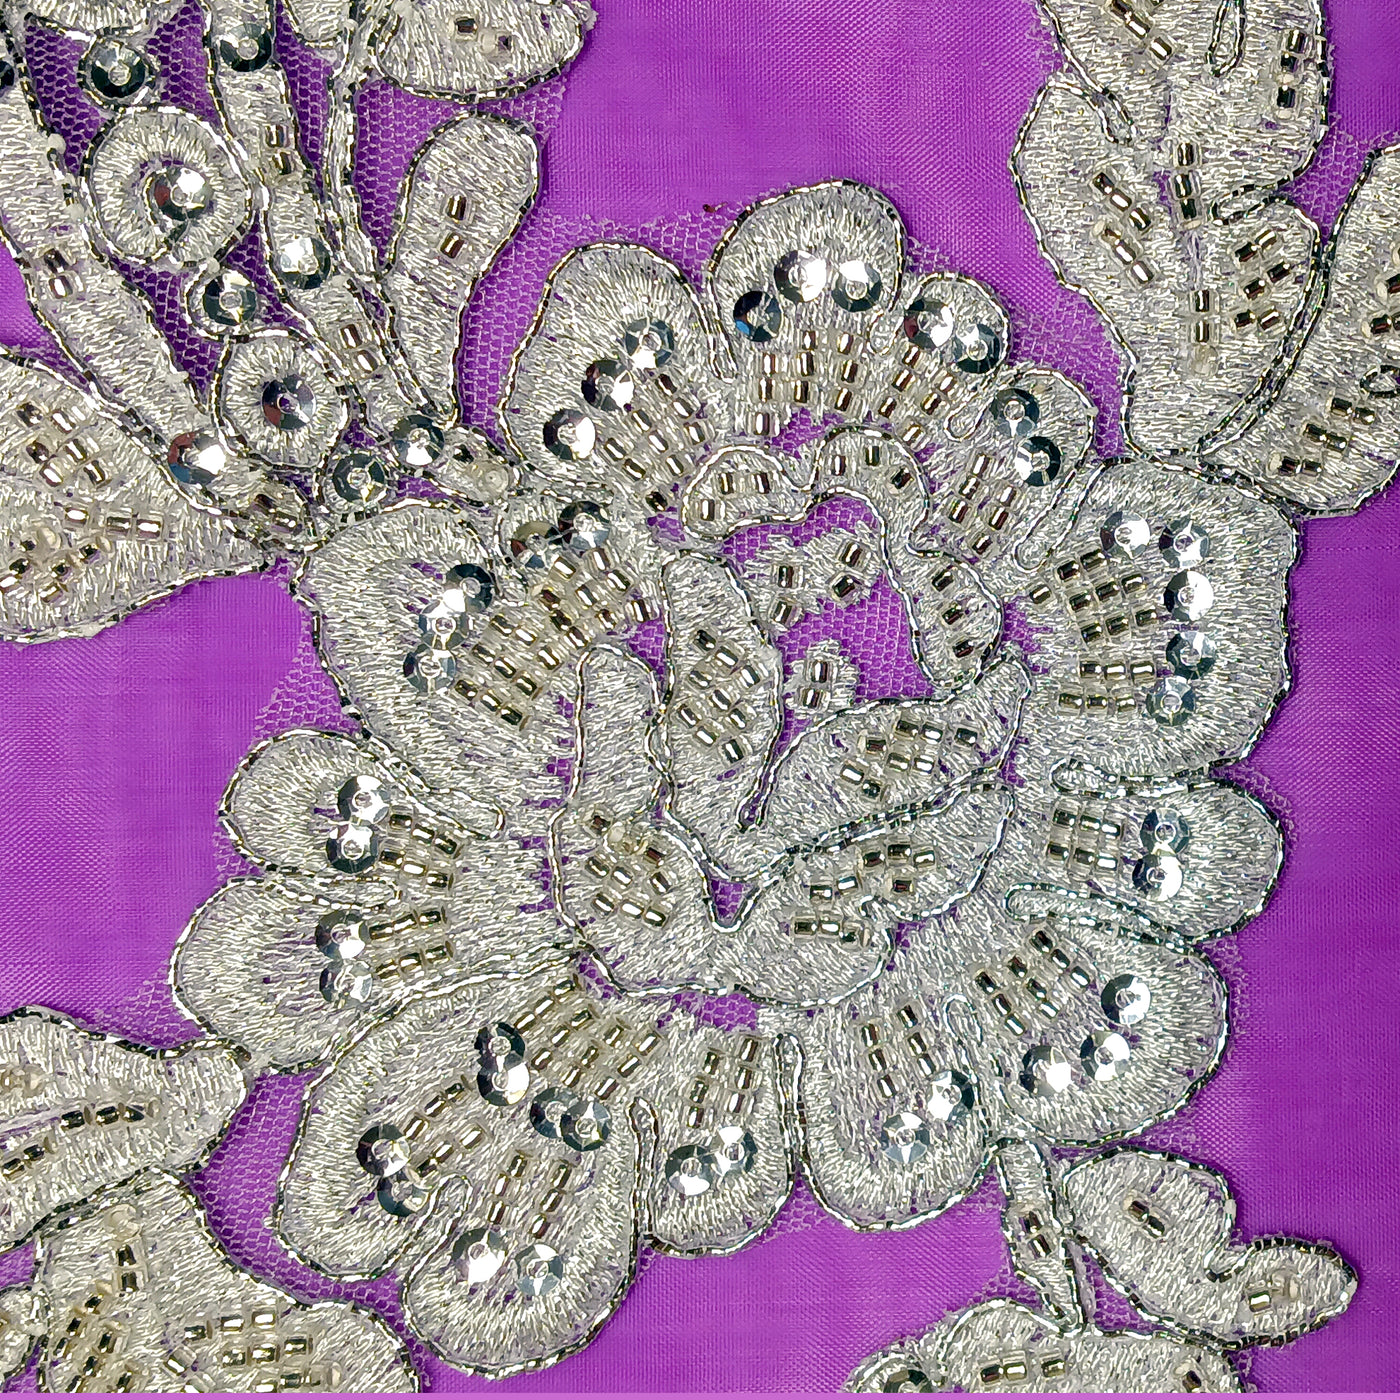 Beaded & Corded Floral Appliqué Lace Embroidered on 100% Polyester Organza or Net Mesh. This can be applied to Theatrical dance ballroom costumes, bridal dresses, bridal headbands endless possibilities.  Sold By Pair  Lace Usa